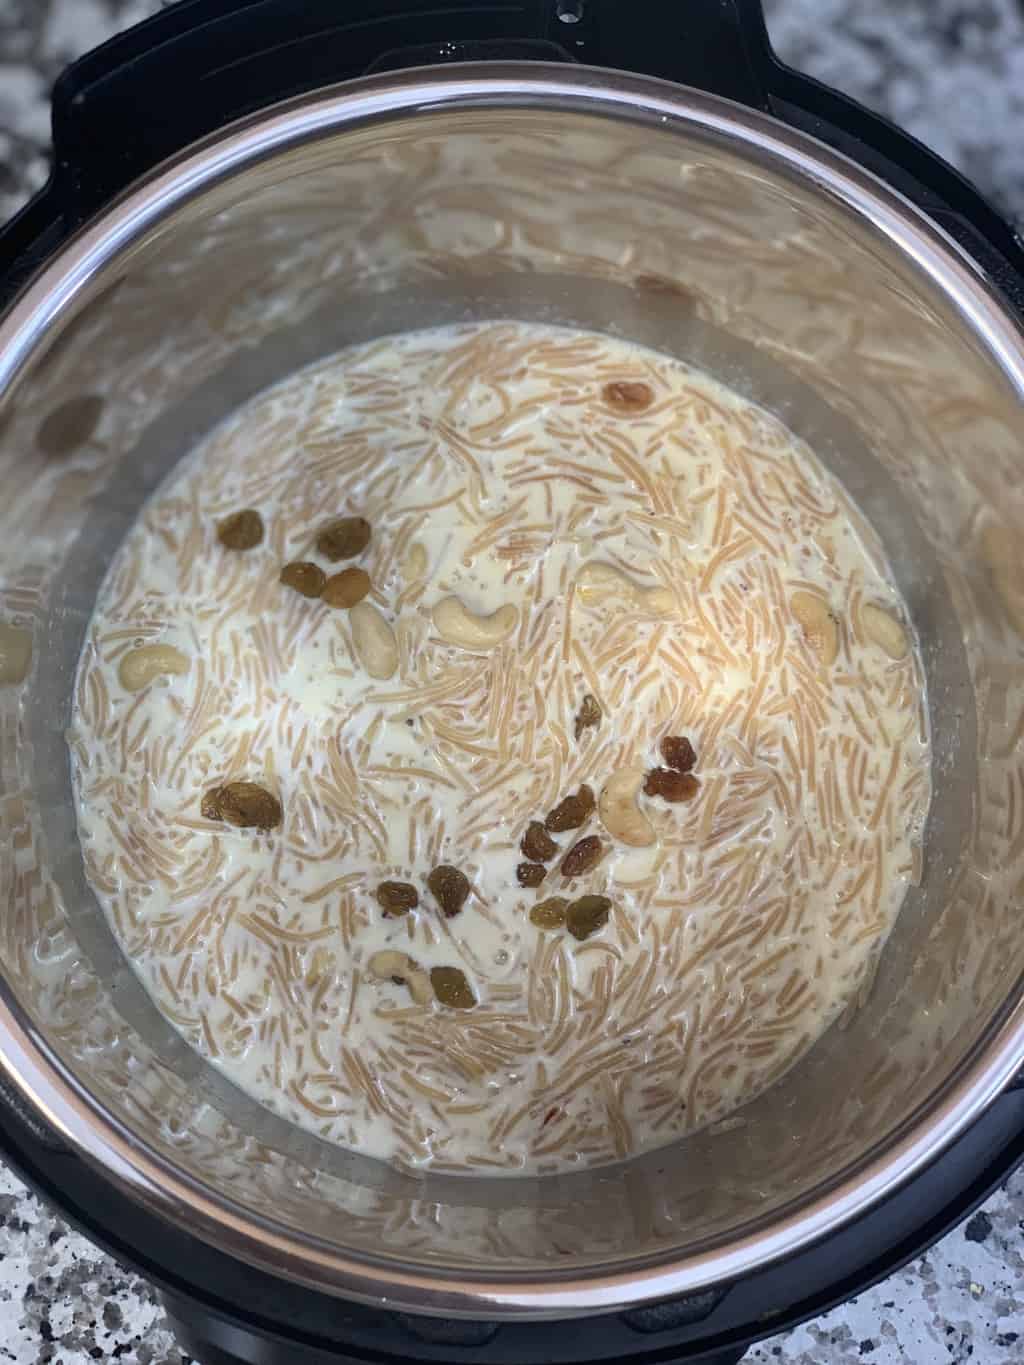 Seviyan kheer recipe in instant pot insert garnished with nuts